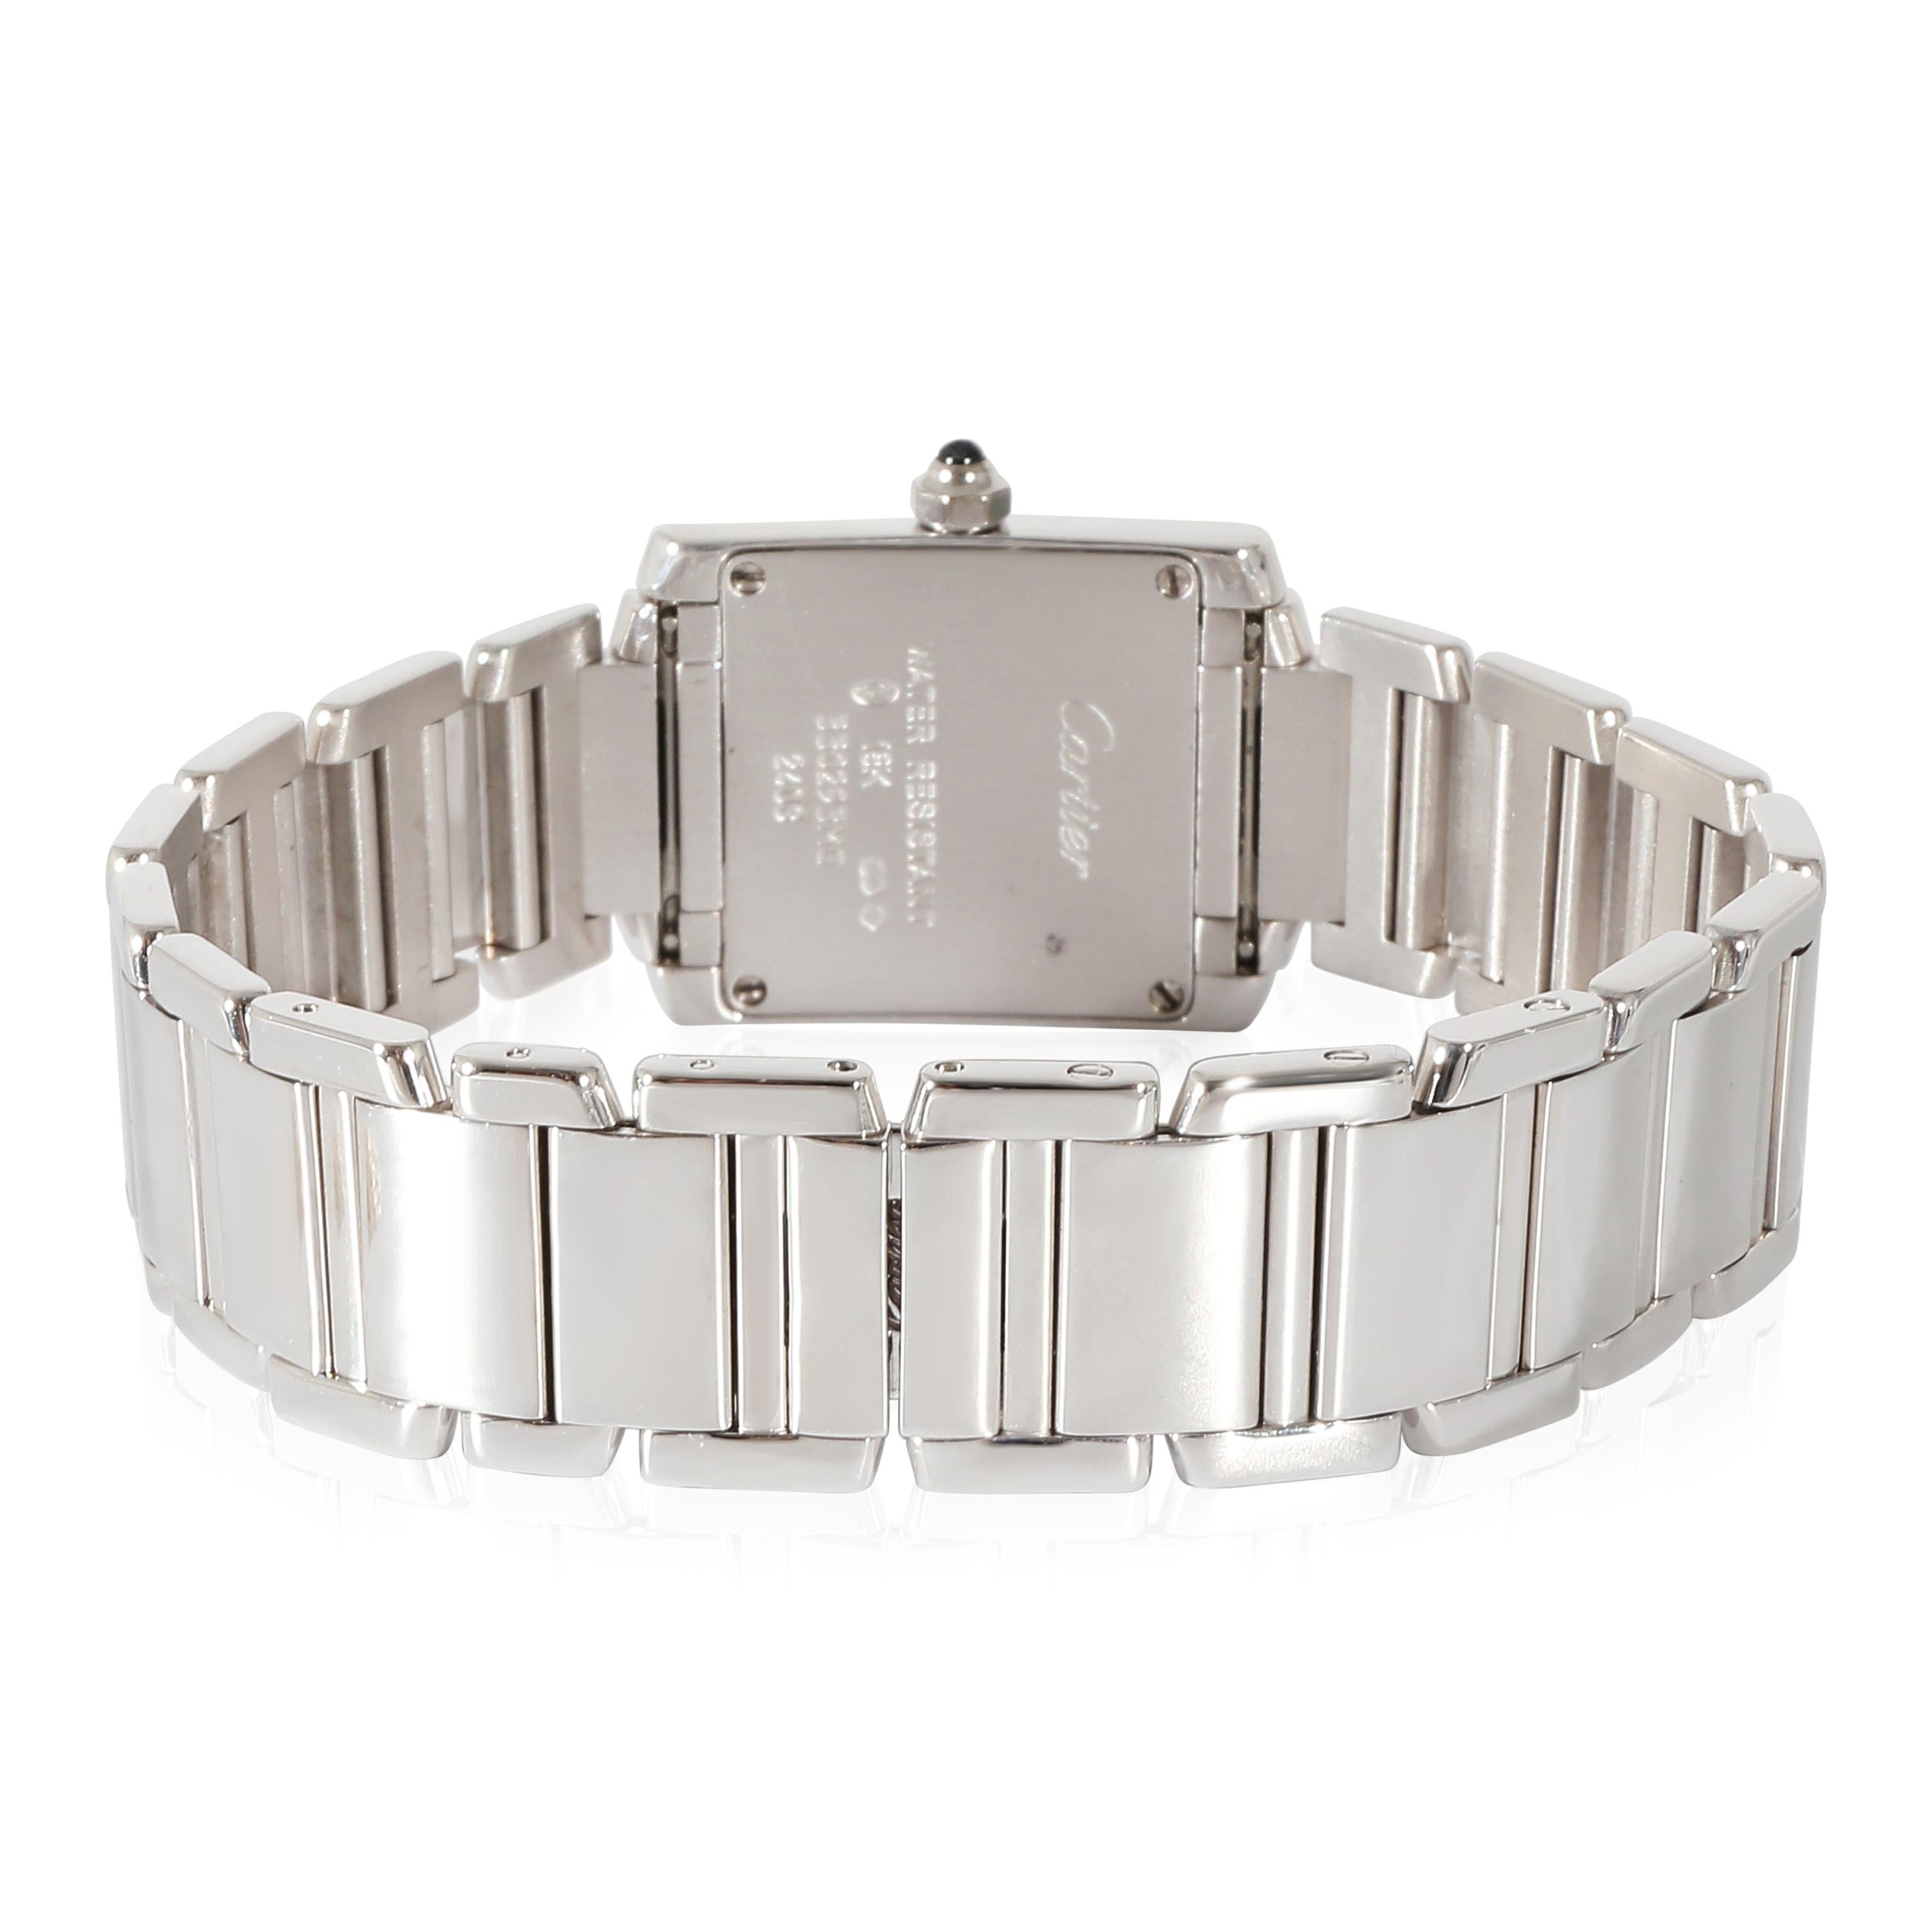 Cartier Tank Francaise W50012S3 Women's Watch in 18kt White Gold

SKU: 115848

PRIMARY DETAILS
Brand: Cartier
Model: Tank Francaise
Country of Origin: Switzerland
Movement Type: Quartz: Battery
Year of Manufacture: 2000-2009
Condition: Louis Cartier